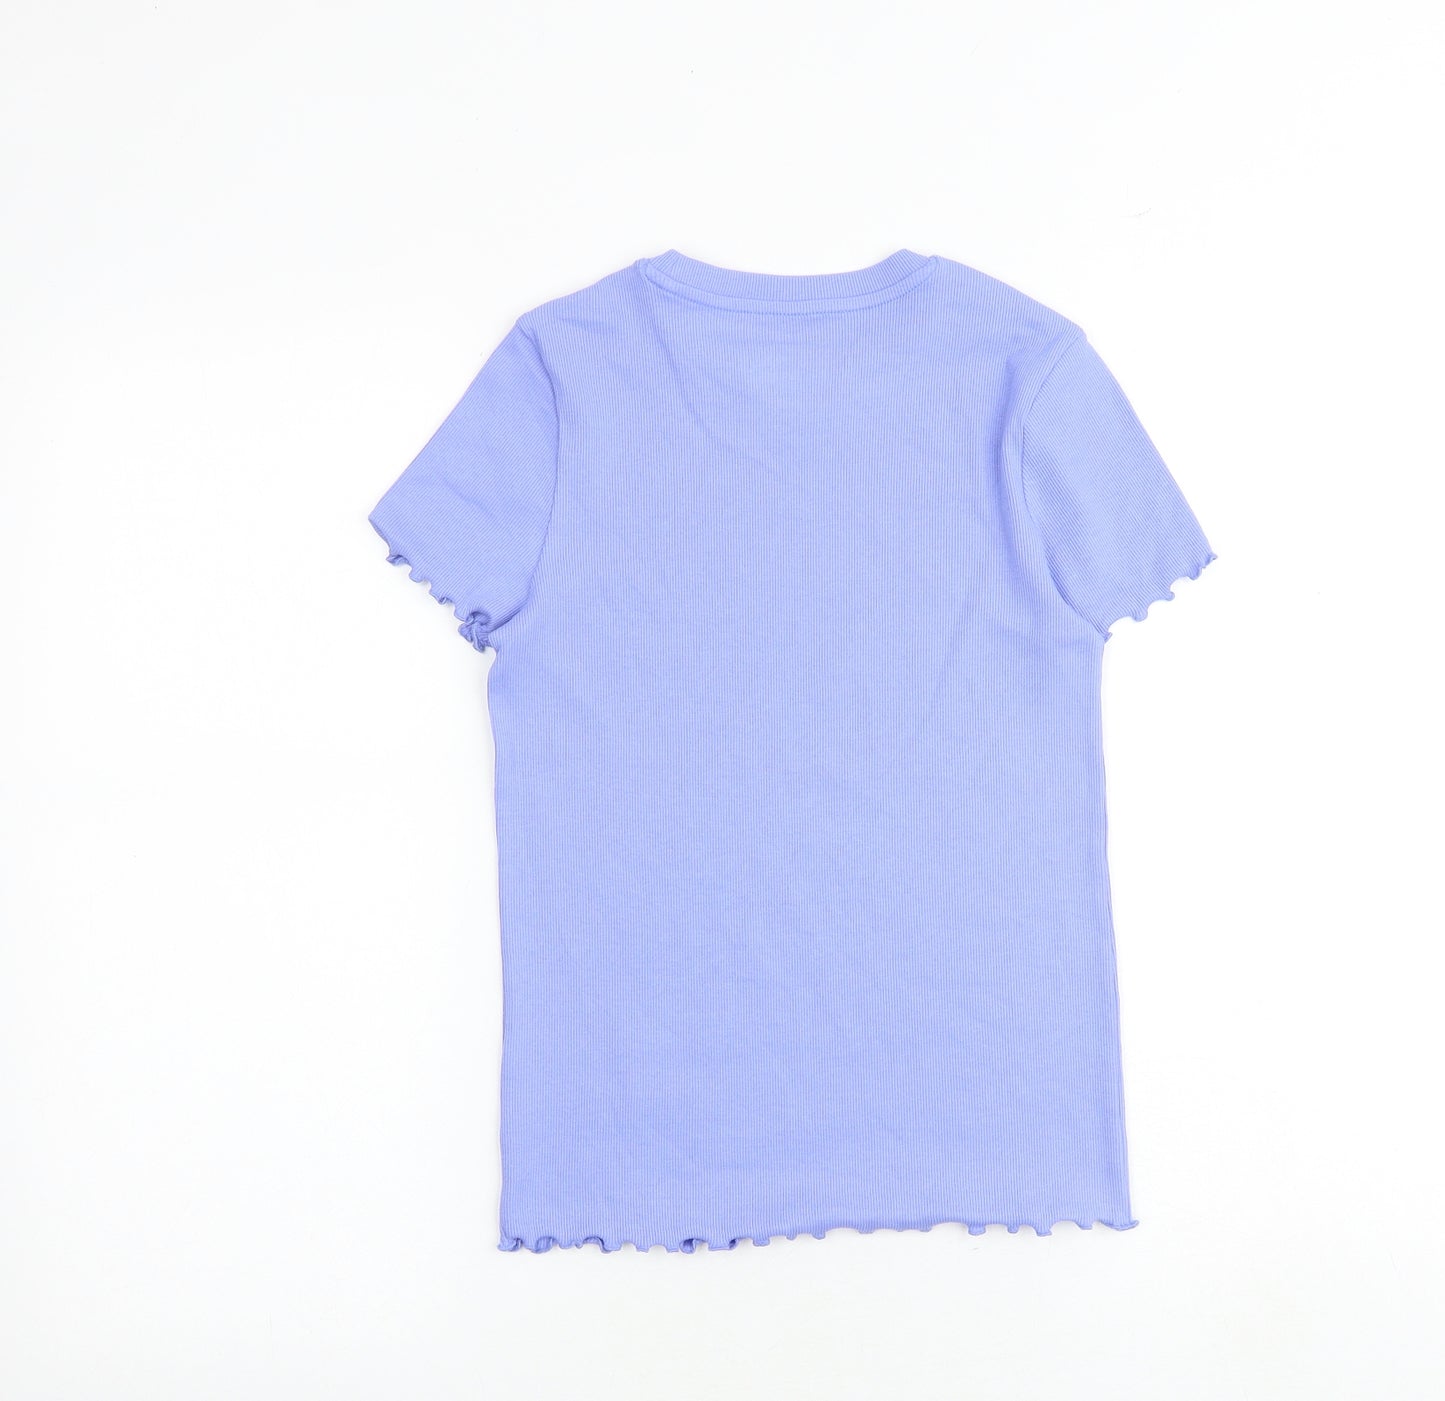 Marks and Spencer Girls Purple Cotton Basic T-Shirt Size 10-11 Years Round Neck Pullover